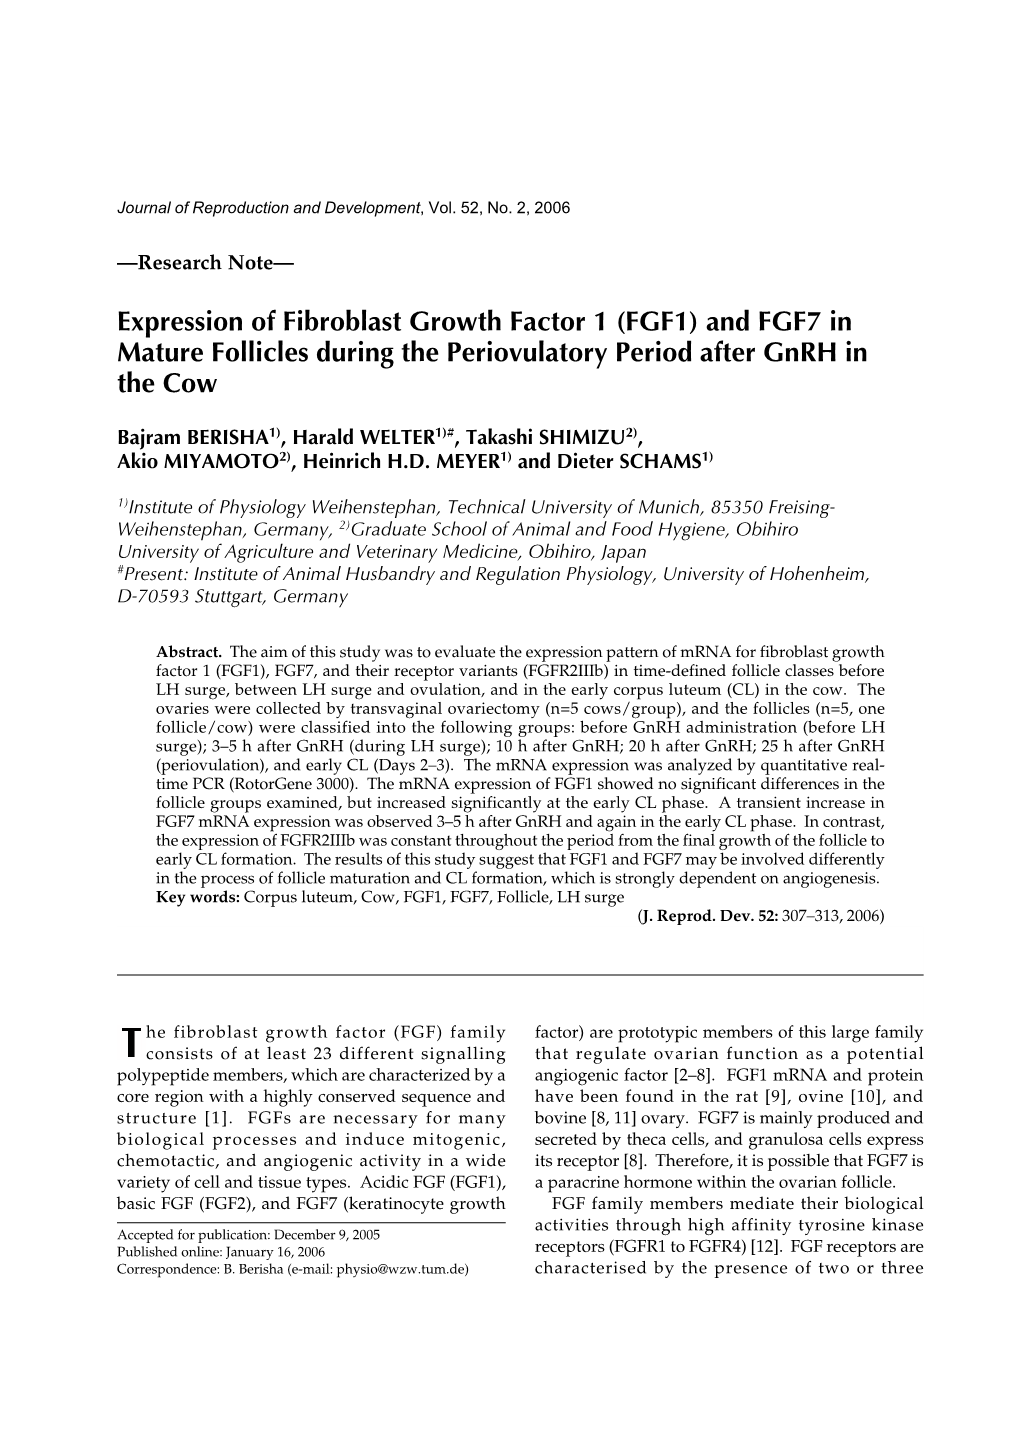 Expression of Fibroblast Growth Factor 1 (FGF1) and FGF7 in Mature Follicles During the Periovulatory Period After Gnrh in the Cow